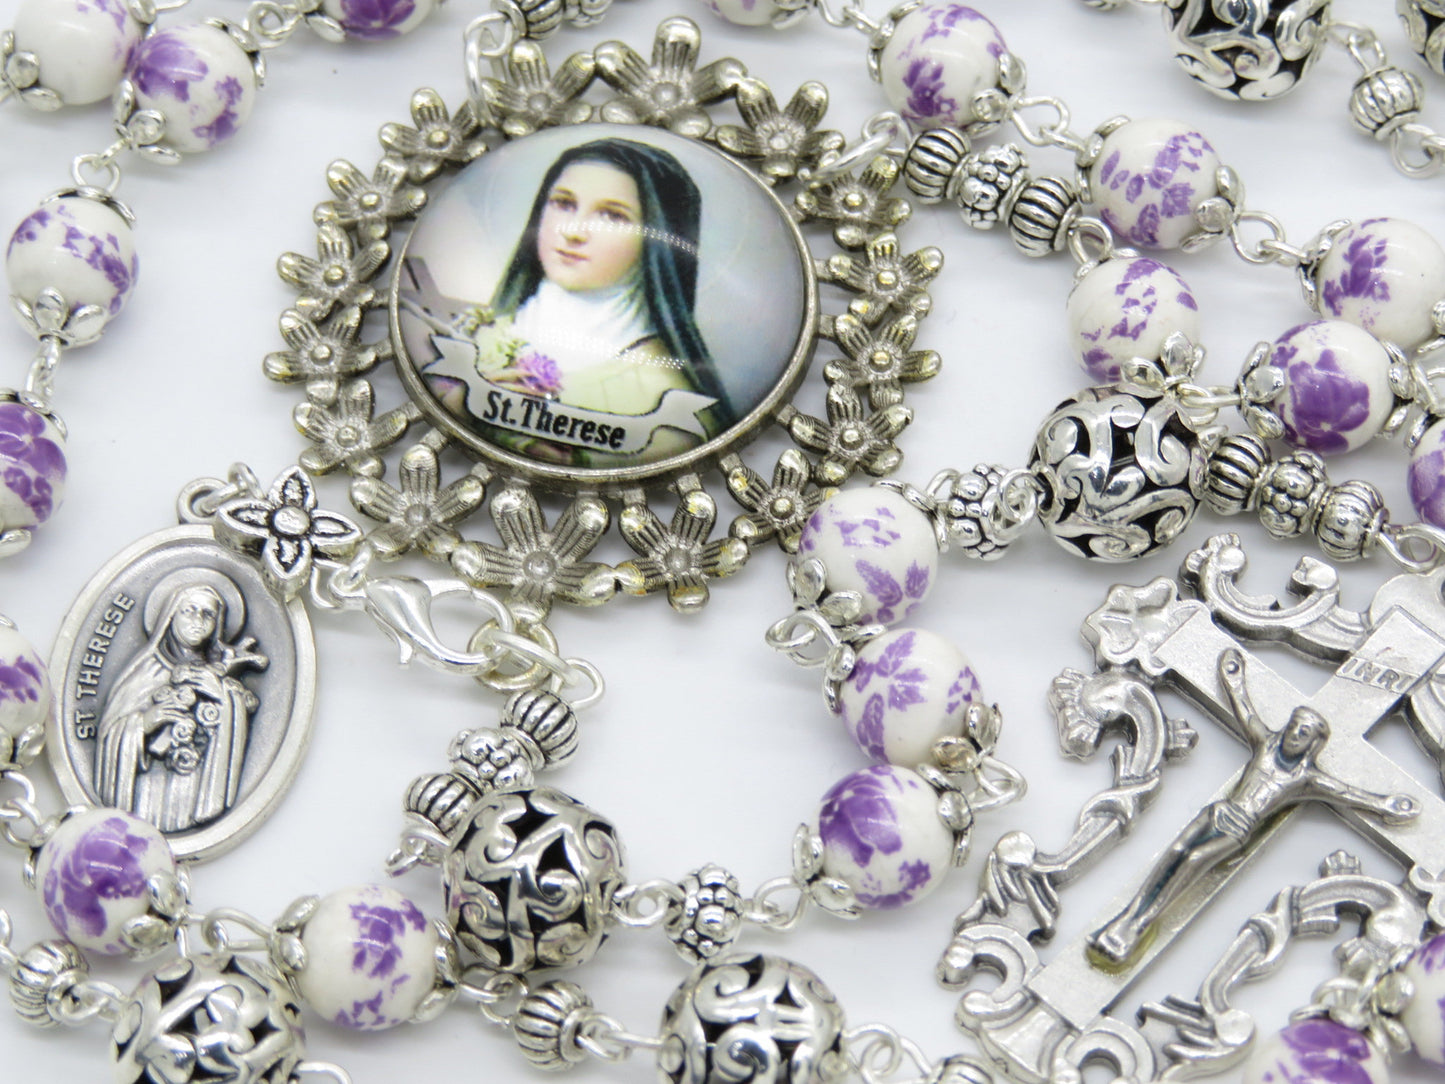 Saint Therese of Lisieux Porcelain RELIC Rosary beads, Silver Rose Rosaries, Devotional Prayer Rosaries, Sacramental Rosary beads.